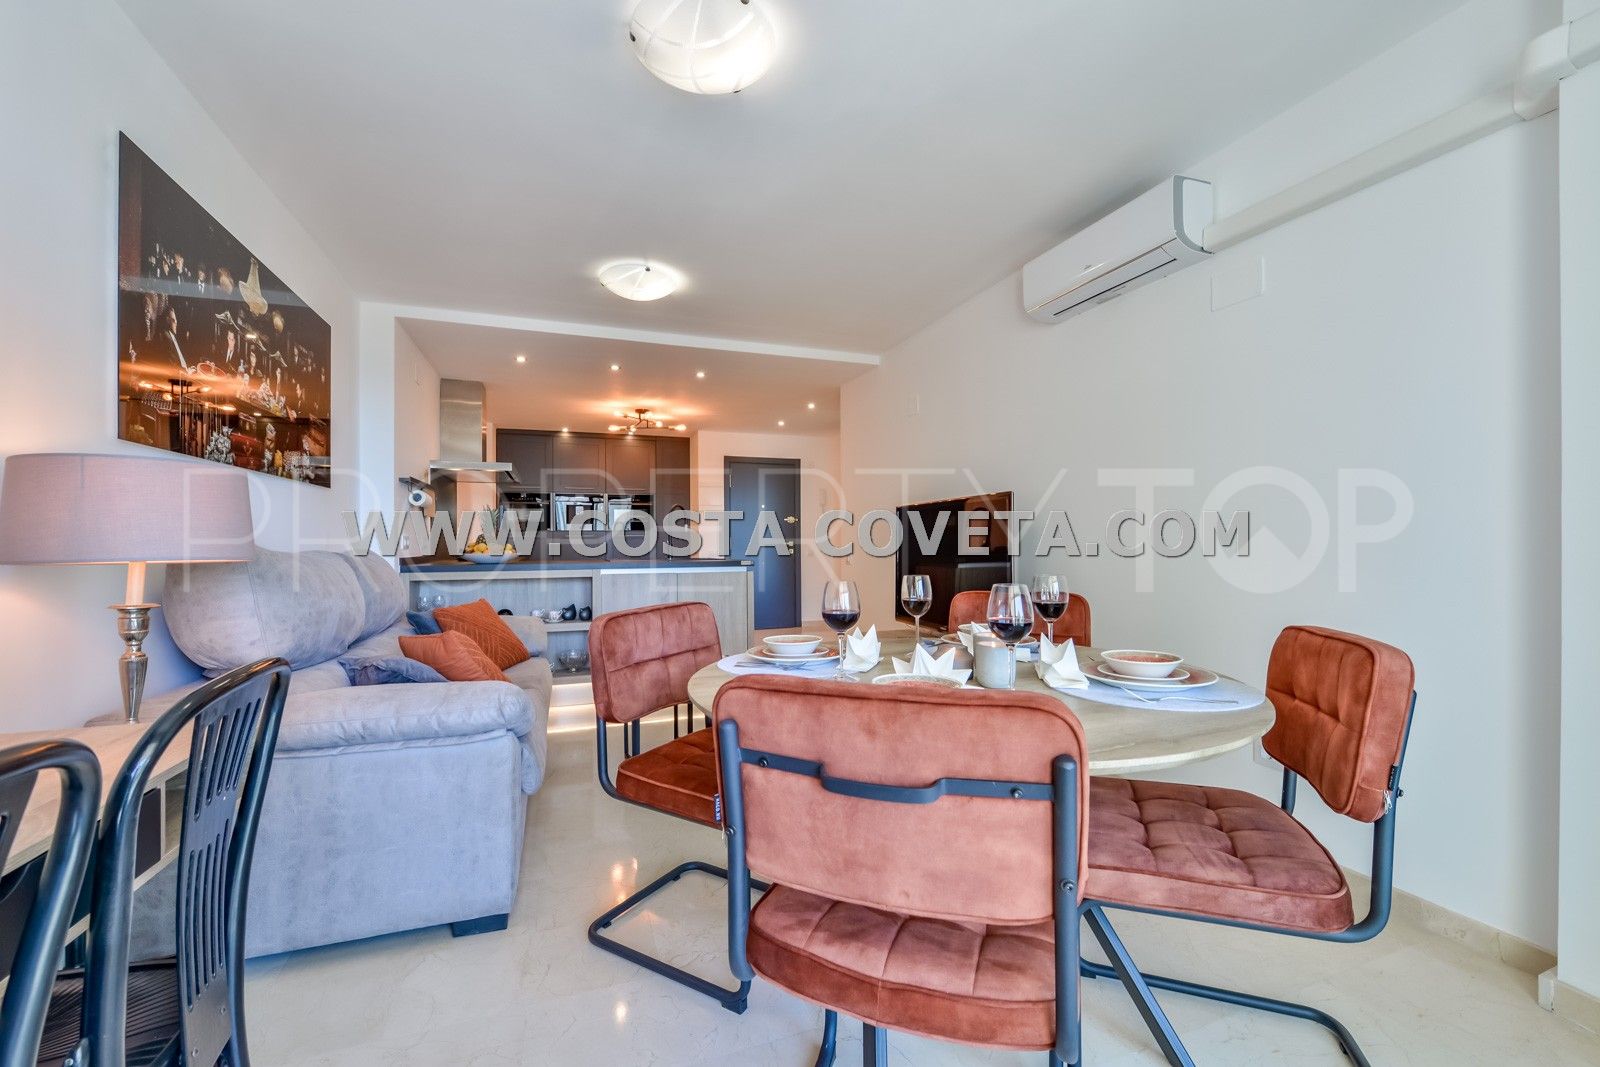 For sale apartment with 1 bedroom in Cala de Finestrat